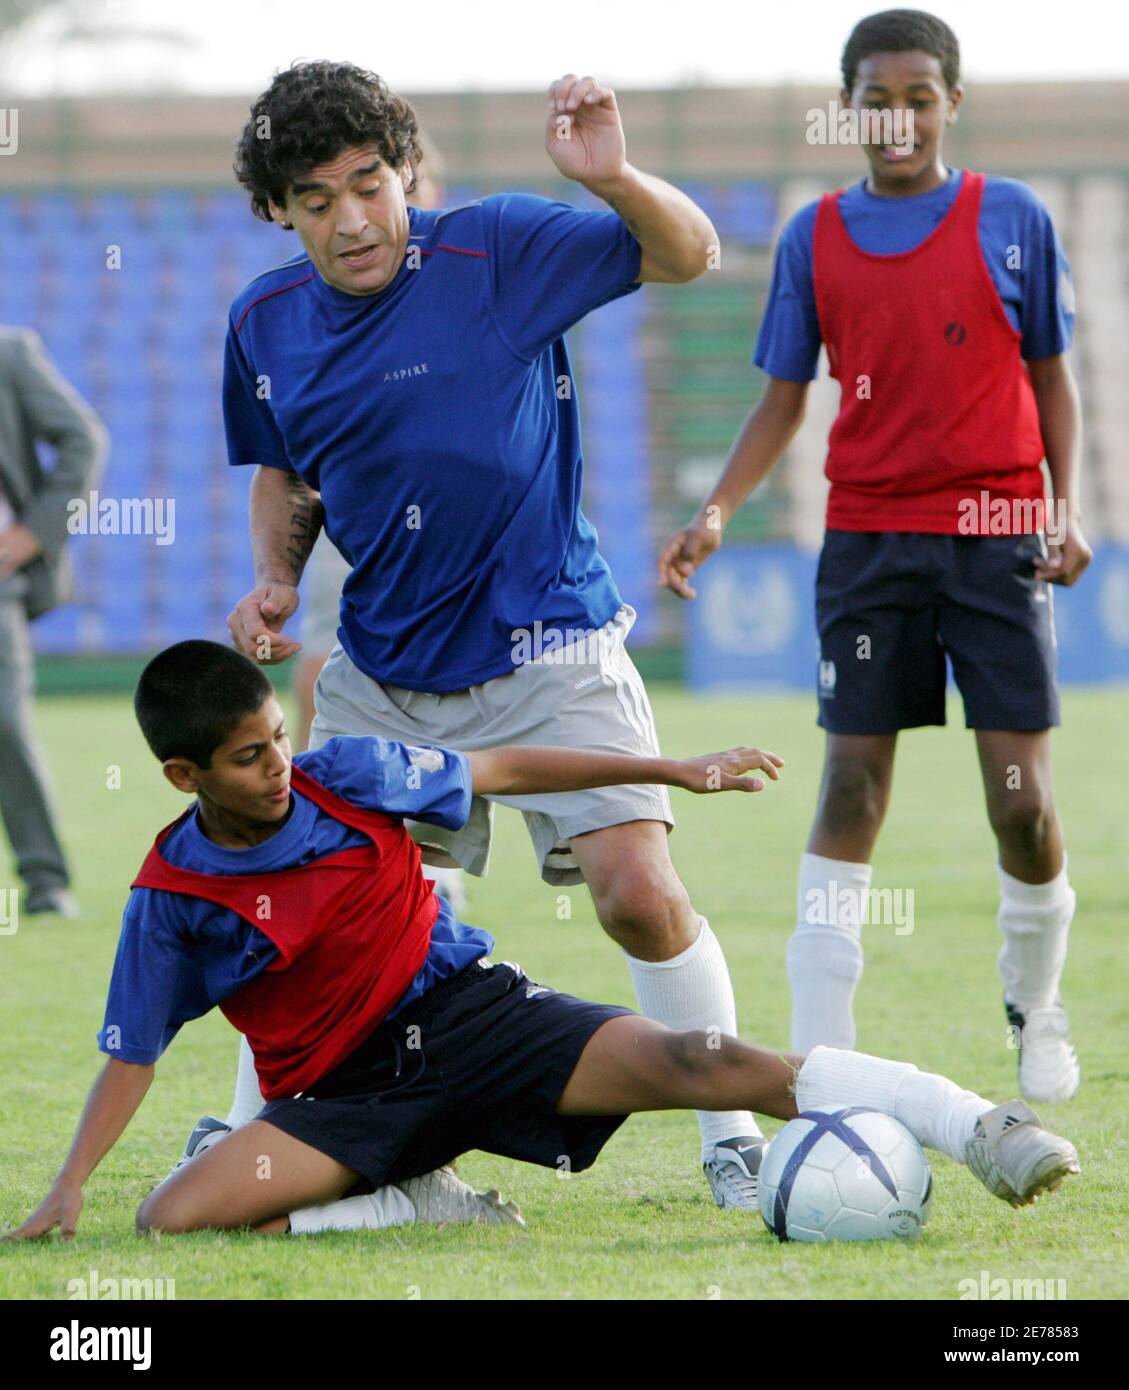 Argentina soccer legend Diego Maradona (C) challenges Qatar's under-14  player while playing for the ASPIRE team in Doha November 17, 2005.  Maradona and Brazil's Pele were headlining the guest list for the